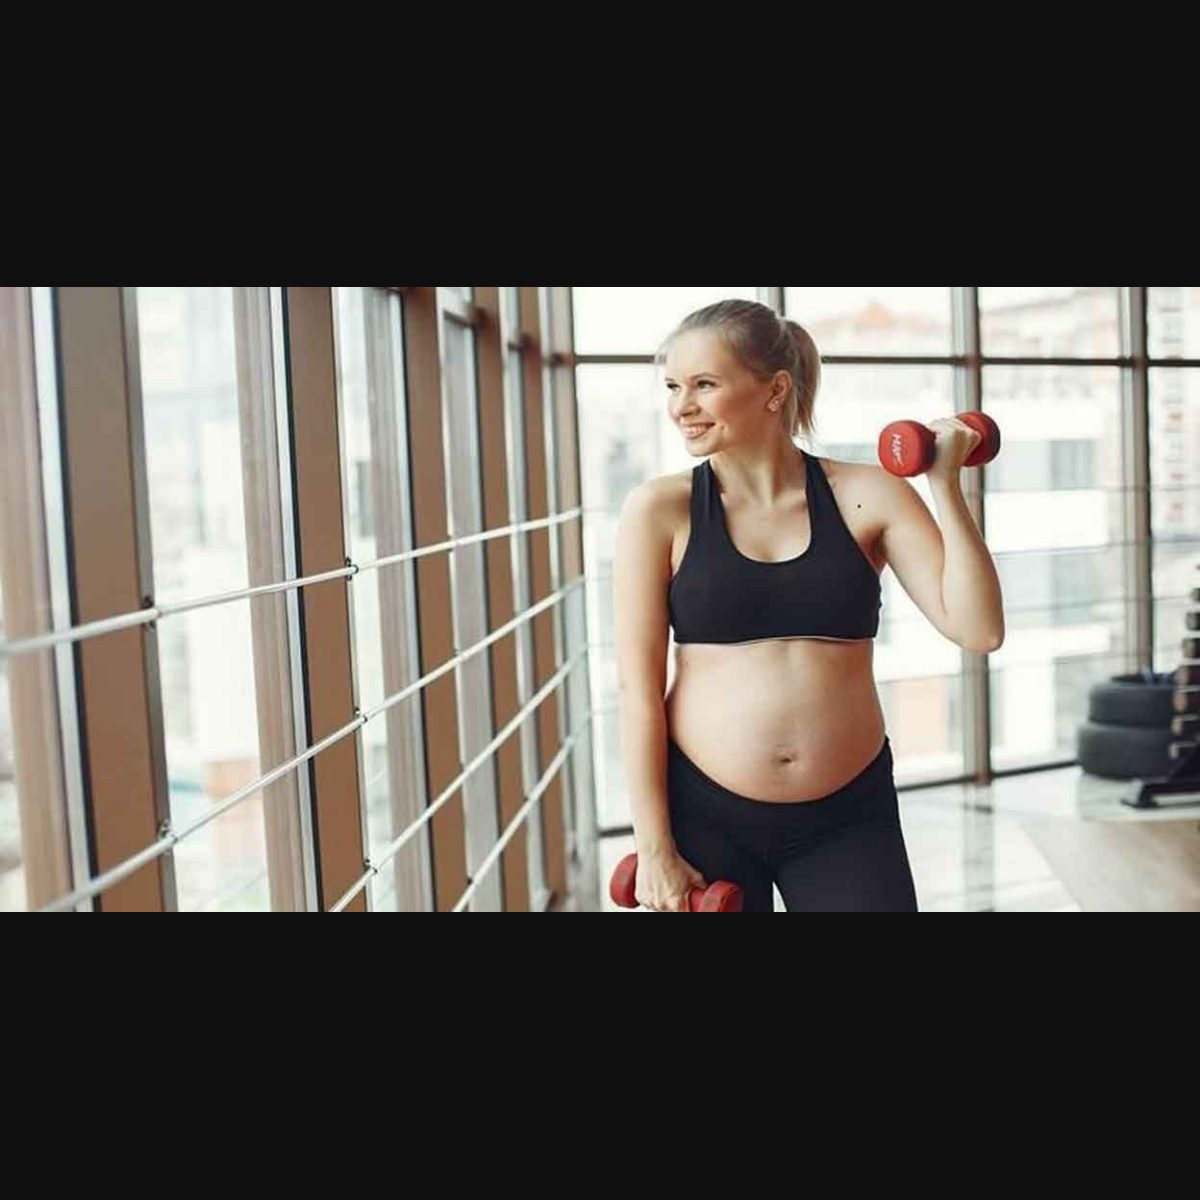 What you need to know about maternity bra as pregnancy begins